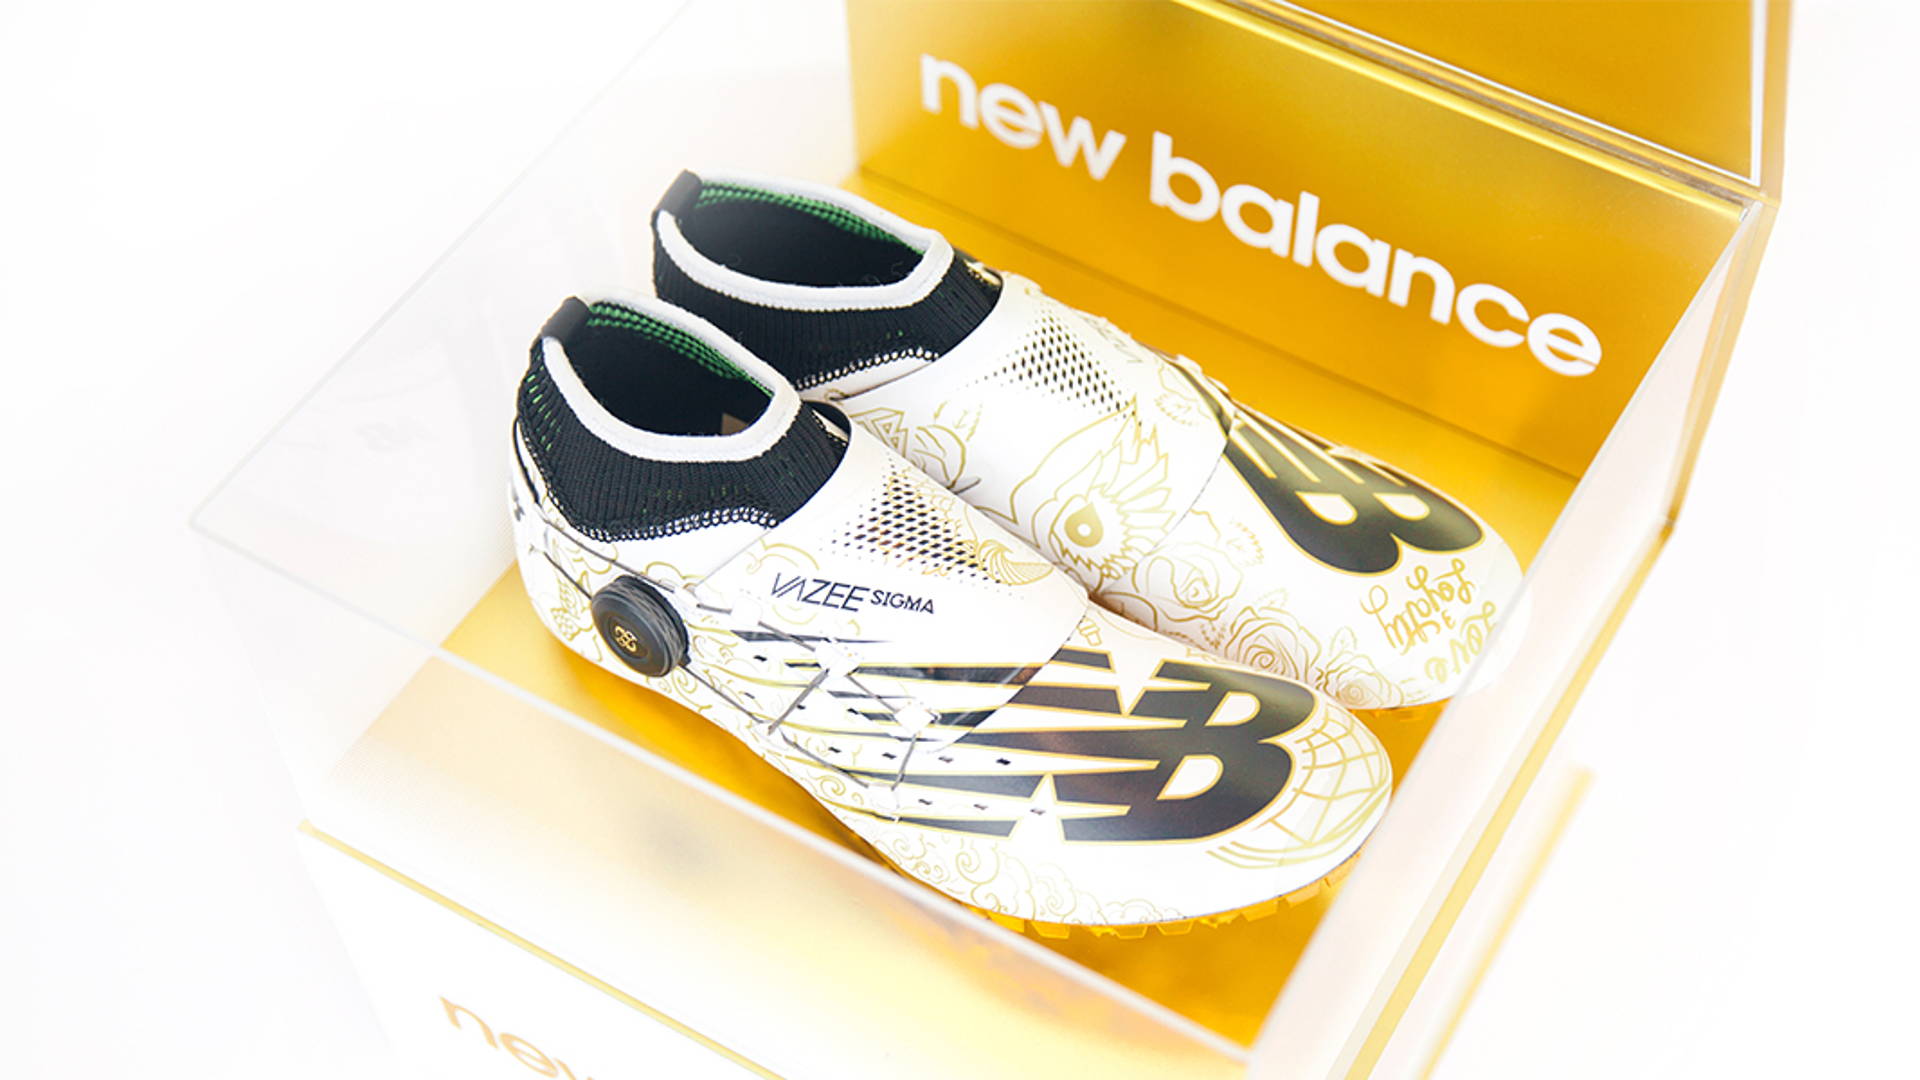 Pride and Glory Custom New Balance Sneakers for Olympian Trayvon Bromell |  Dieline - Design, Branding & Packaging Inspiration